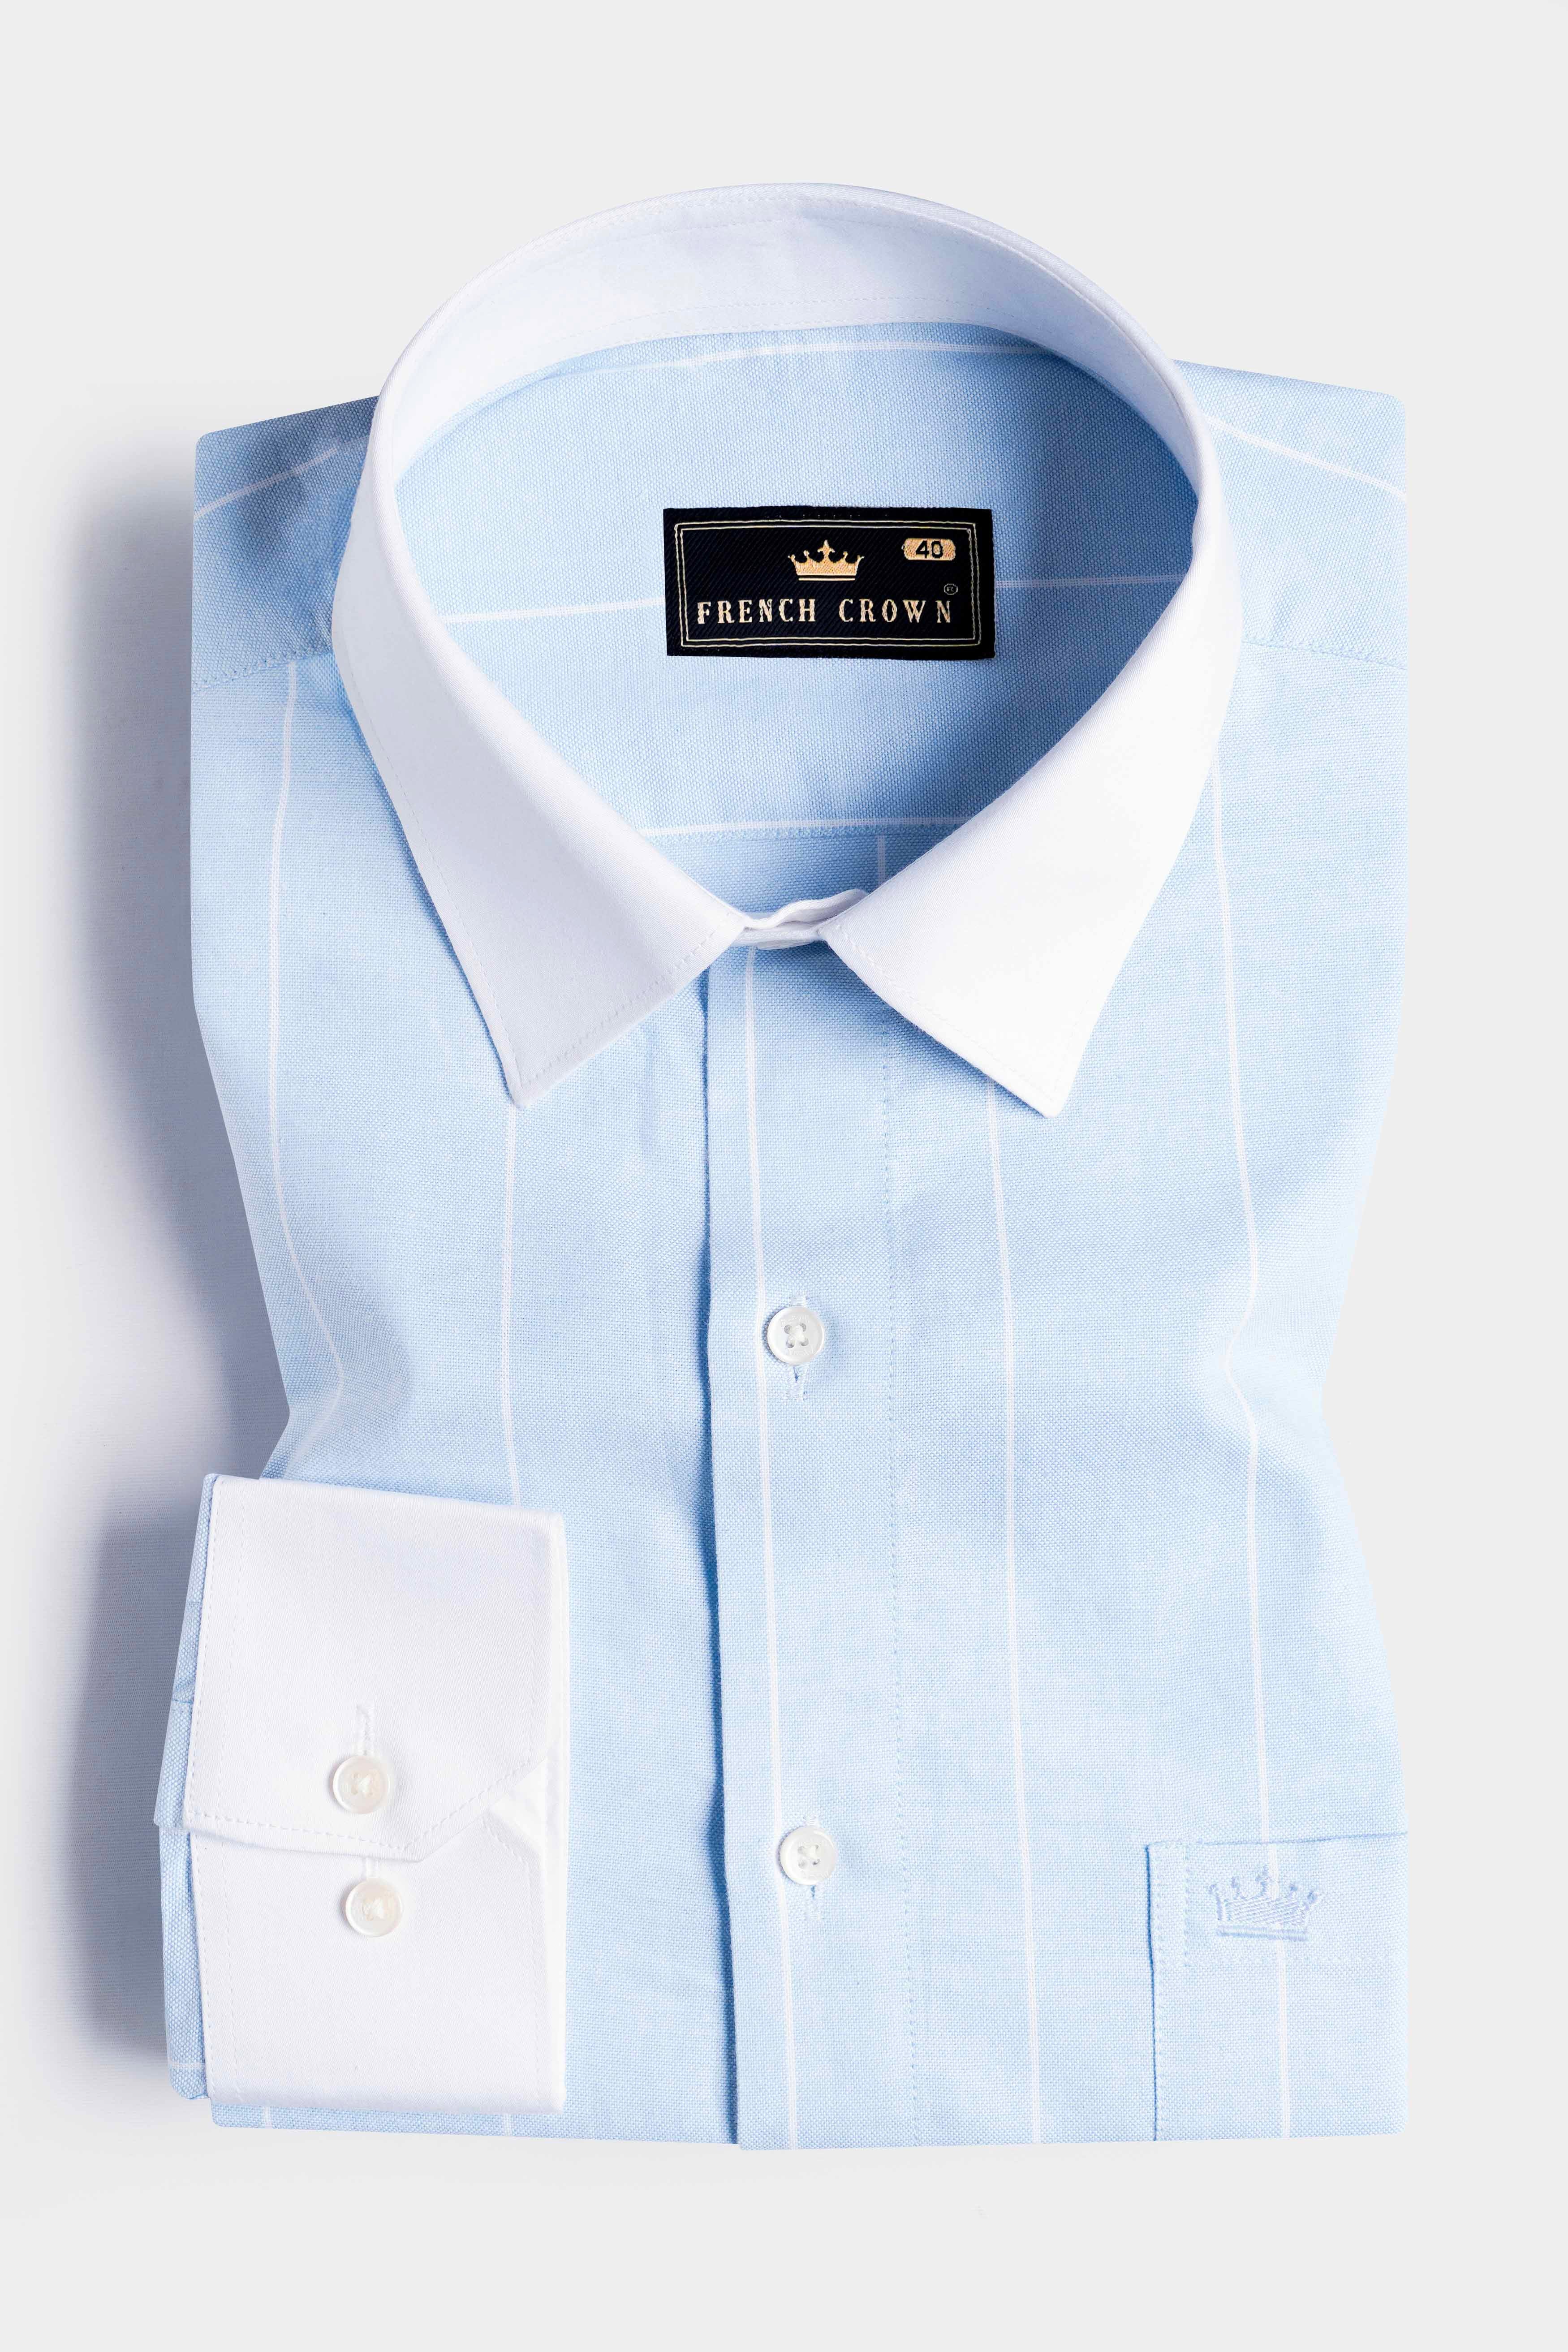 Hawkes Blue and White Striped with White Cuffs and Collar Royal Oxford Shirt 11590-WCC-38, 11590-WCC-H-38, 11590-WCC-39, 11590-WCC-H-39, 11590-WCC-40, 11590-WCC-H-40, 11590-WCC-42, 11590-WCC-H-42, 11590-WCC-44, 11590-WCC-H-44, 11590-WCC-46, 11590-WCC-H-46, 11590-WCC-48, 11590-WCC-H-48, 11590-WCC-50, 11590-WCC-H-50, 11590-WCC-52, 11590-WCC-H-52